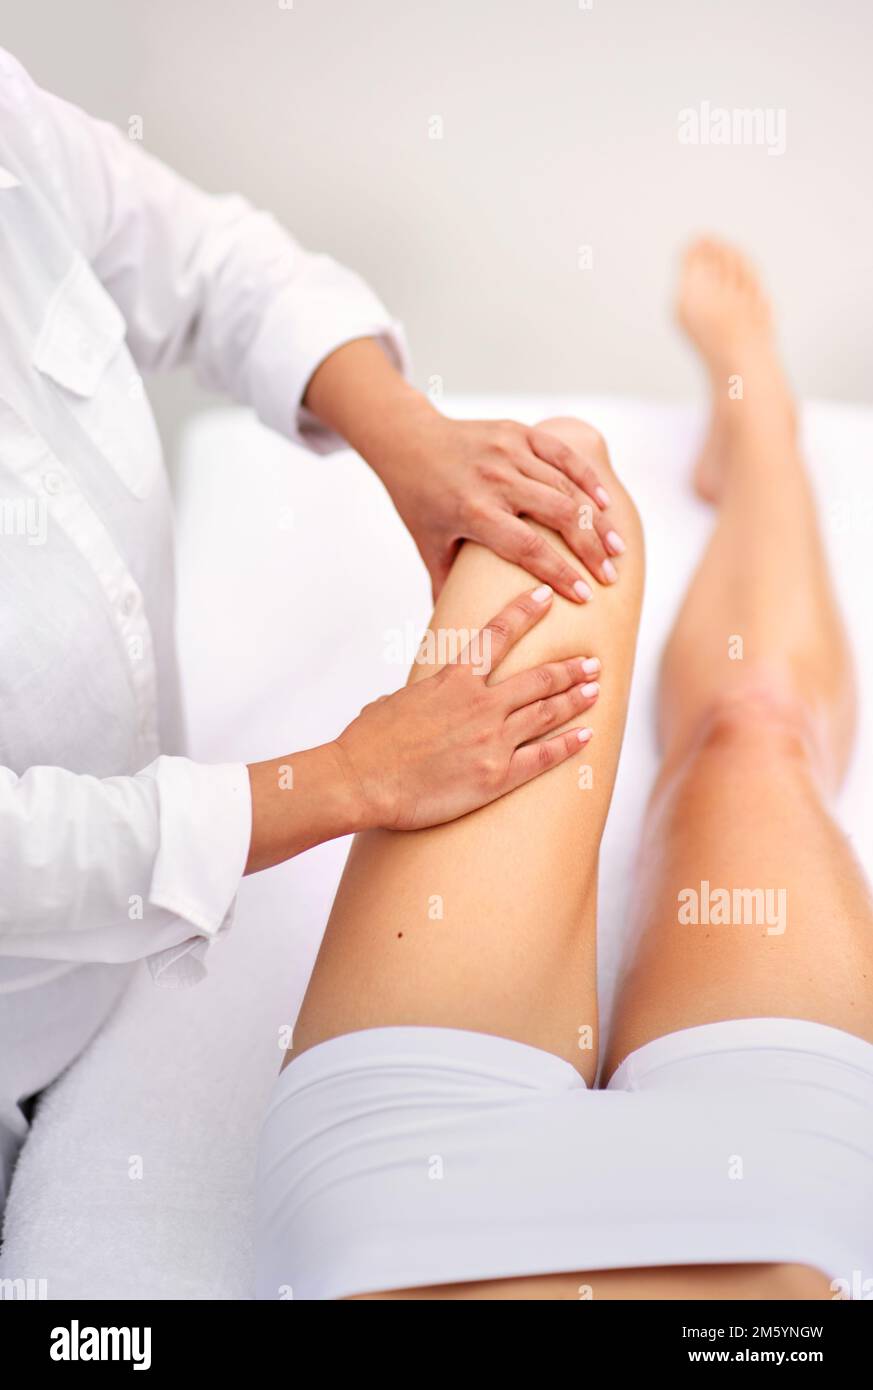 Working out all that tension. a woman enjyoing a massage at the day spa. Stock Photo